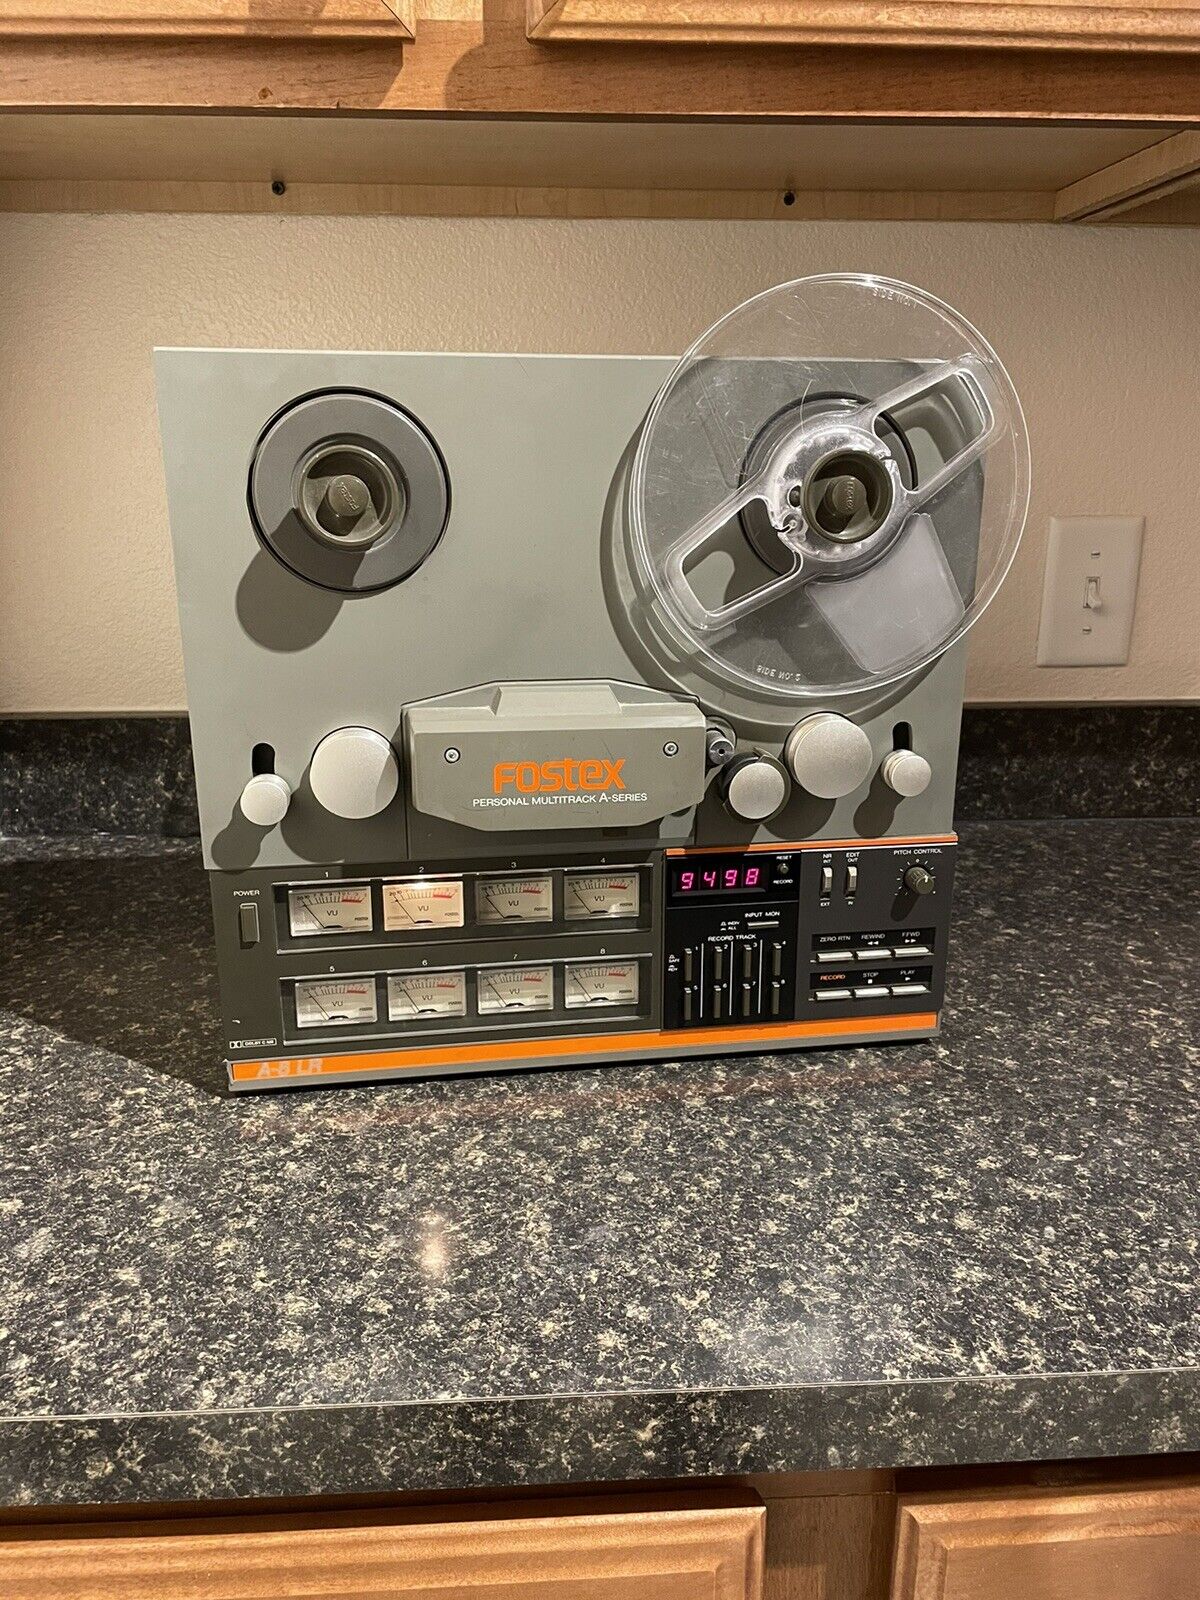 SOLD: Fostex R8 (8 track reel-to-reel tape recorder) + Fostex 812 (8  channel recording mixer) + multicore cables (RCA & 1/4 inch) - Accessories  & Other Musically Related Items For Sale - Basschat